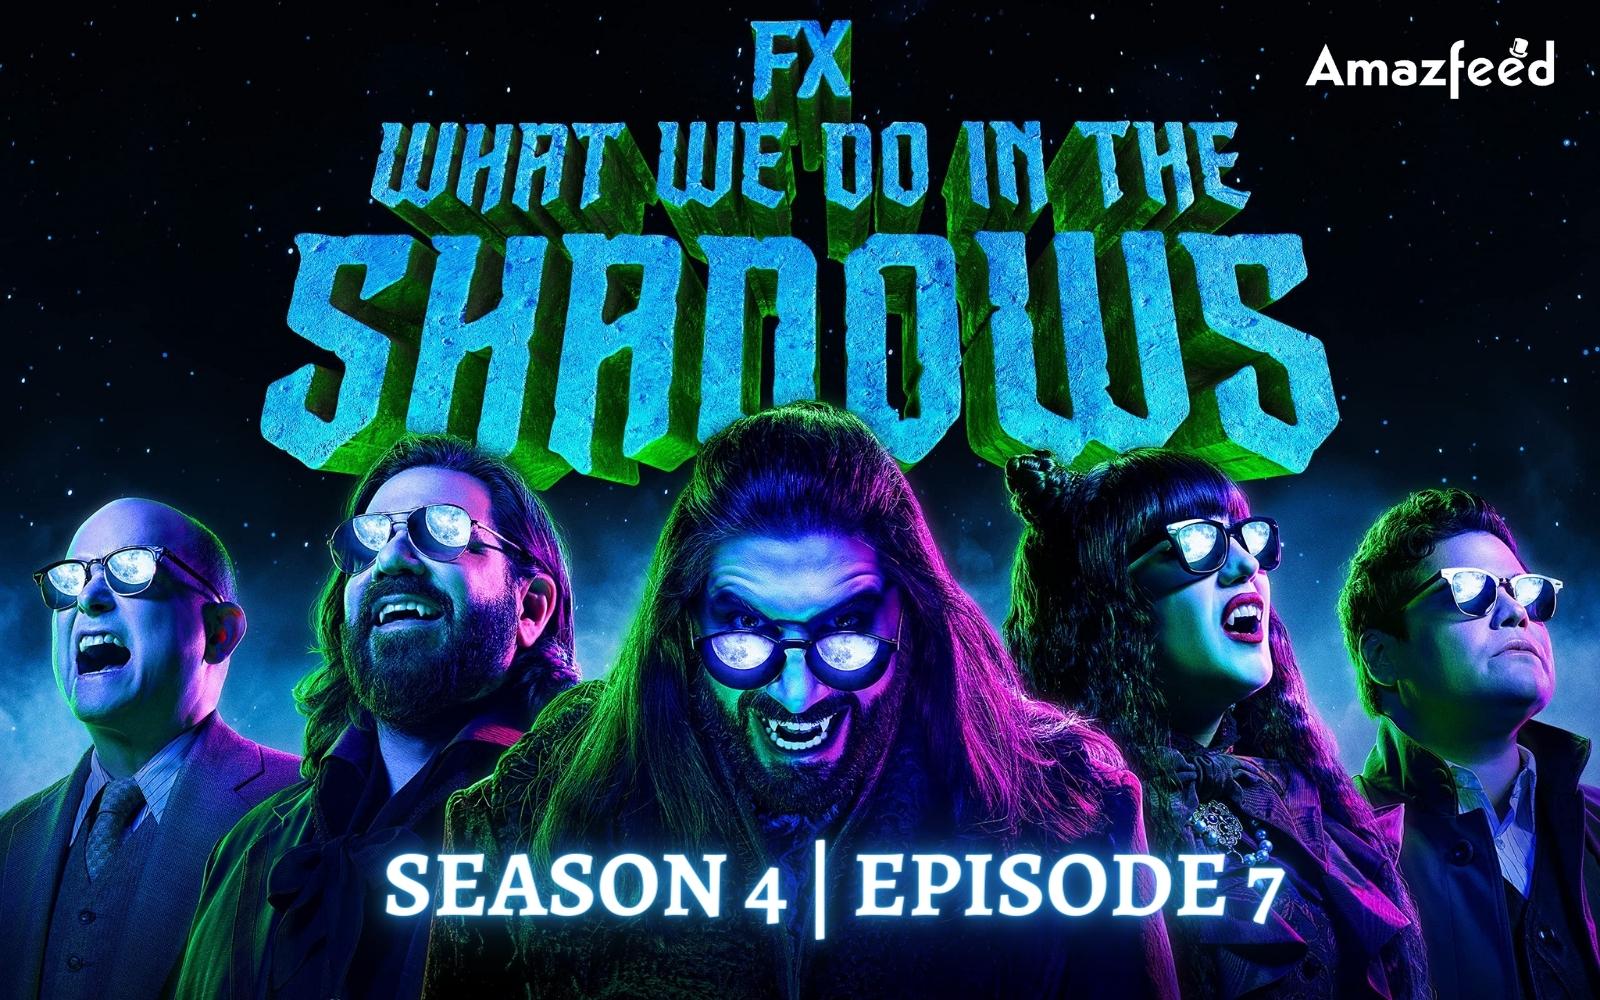 What We Do in the Shadows Season 4 Episode 7 ⇒ Release Date, Recap, Cast, Spoiler and Cast